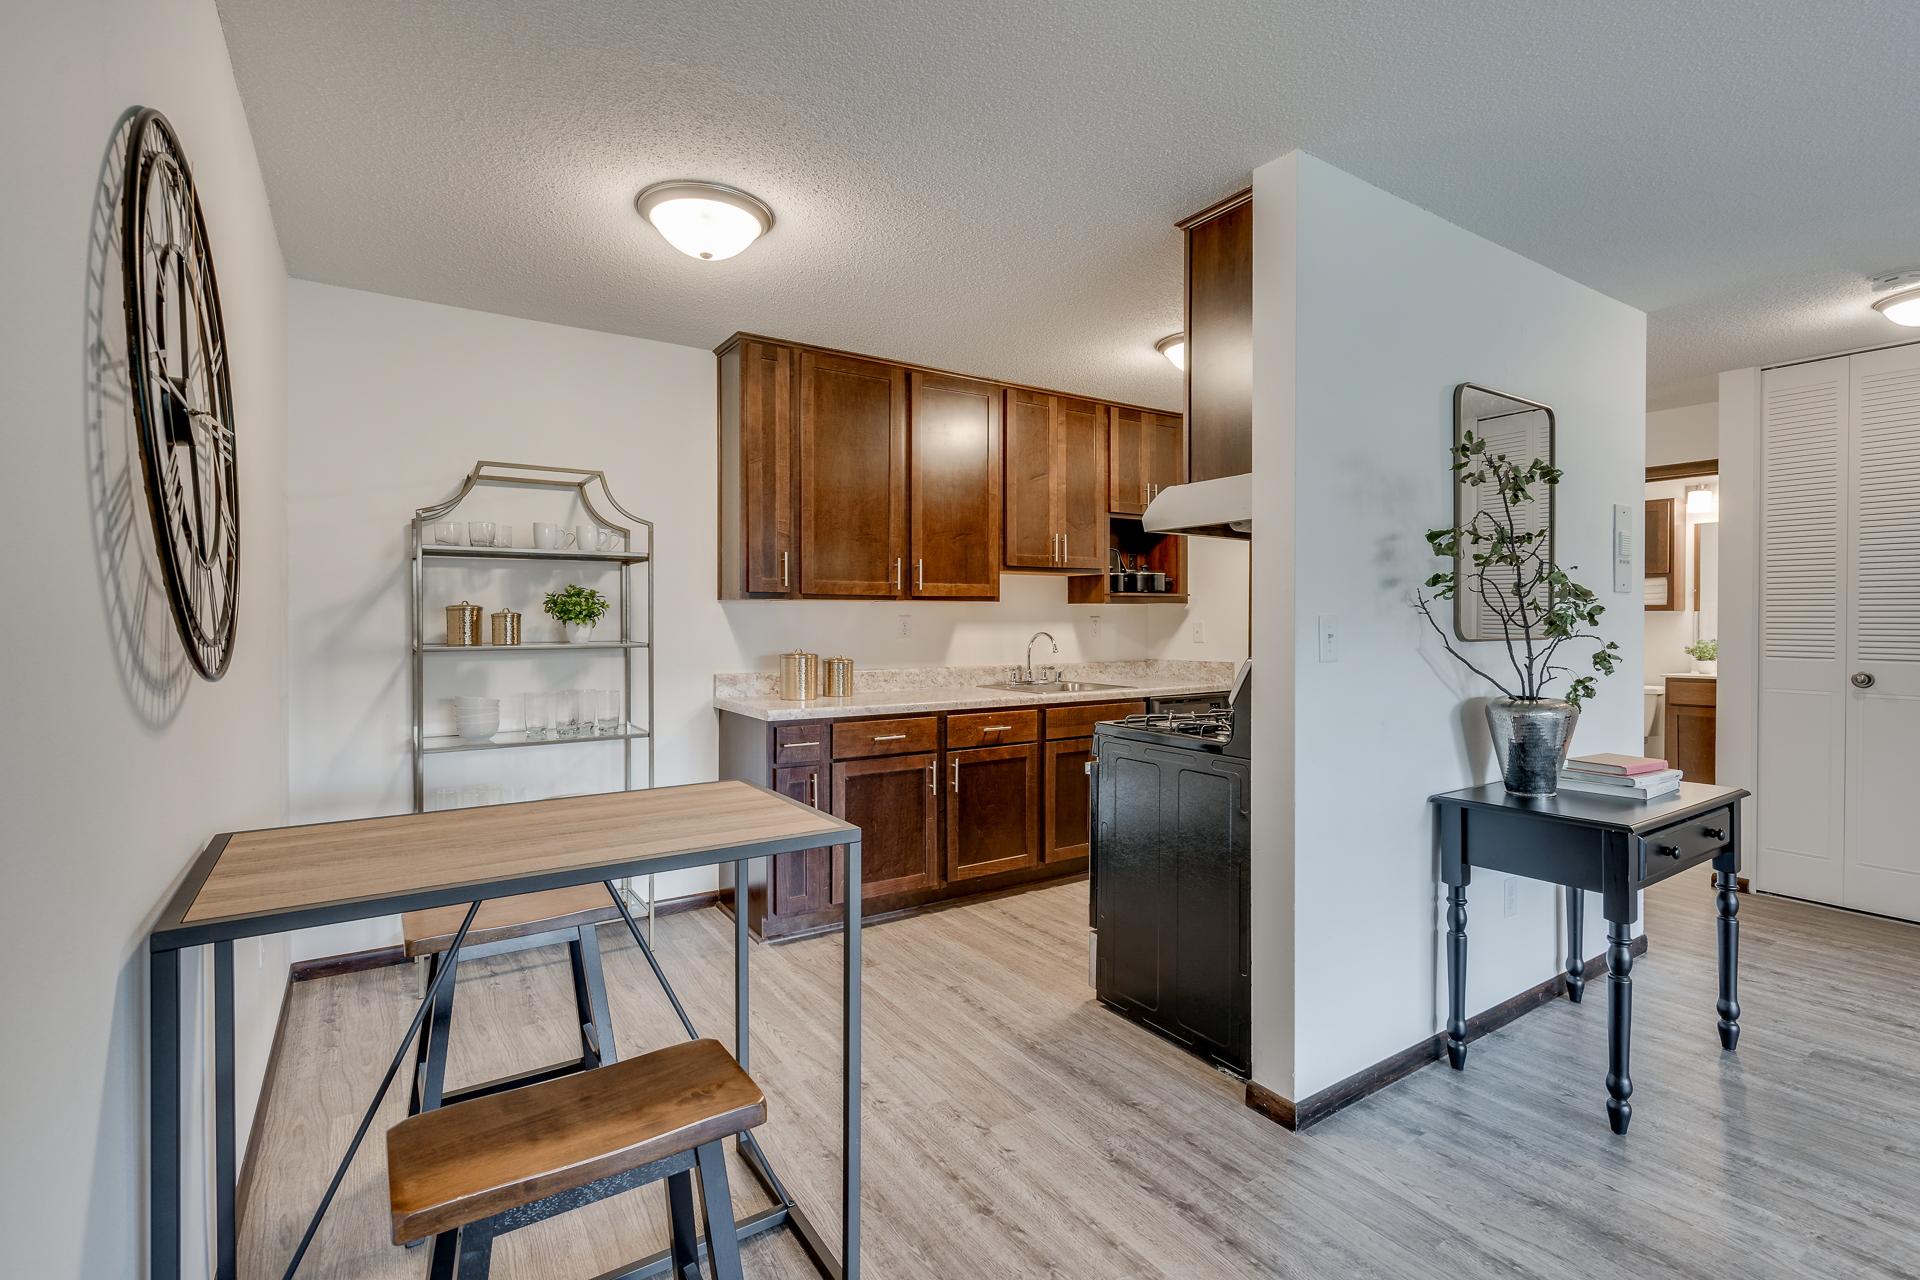 Dining Room And Kitchen At Sumter Green Apartments In Crystal, MN